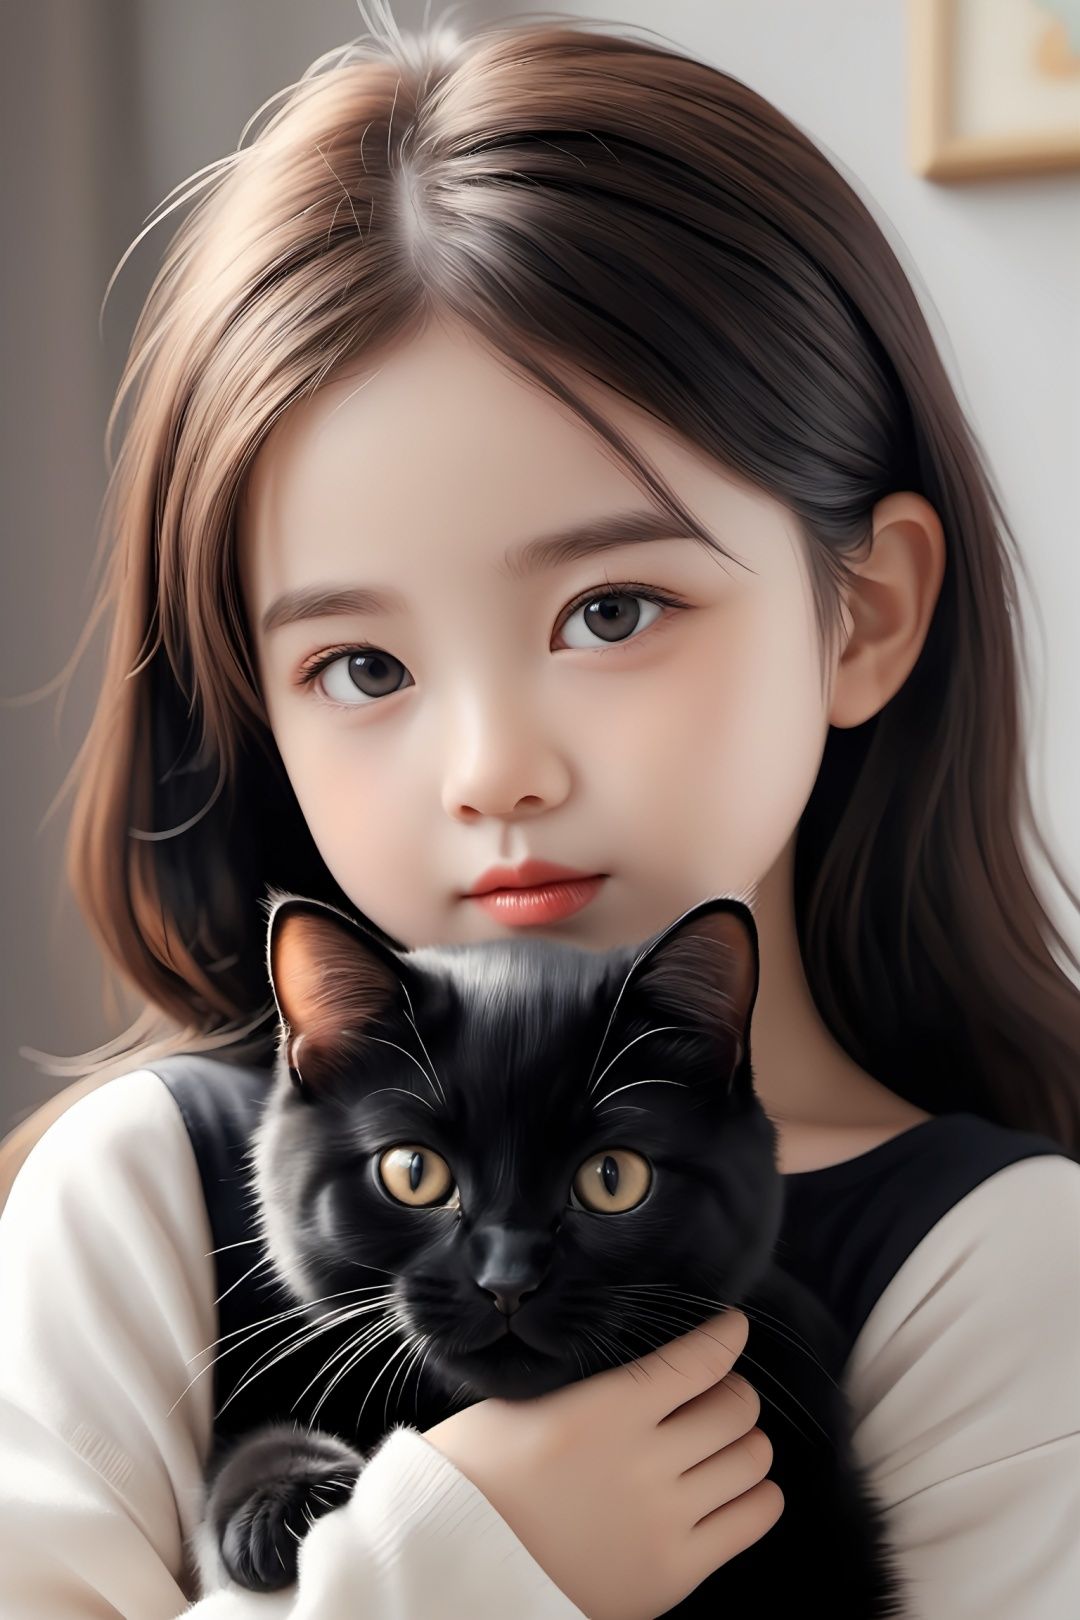 girl with a cute black cat holding it, in the style of photorealistic renderings, babycore, oshare kei, cute and dreamy, 32k uhd, caricature faces, childlike innocence 